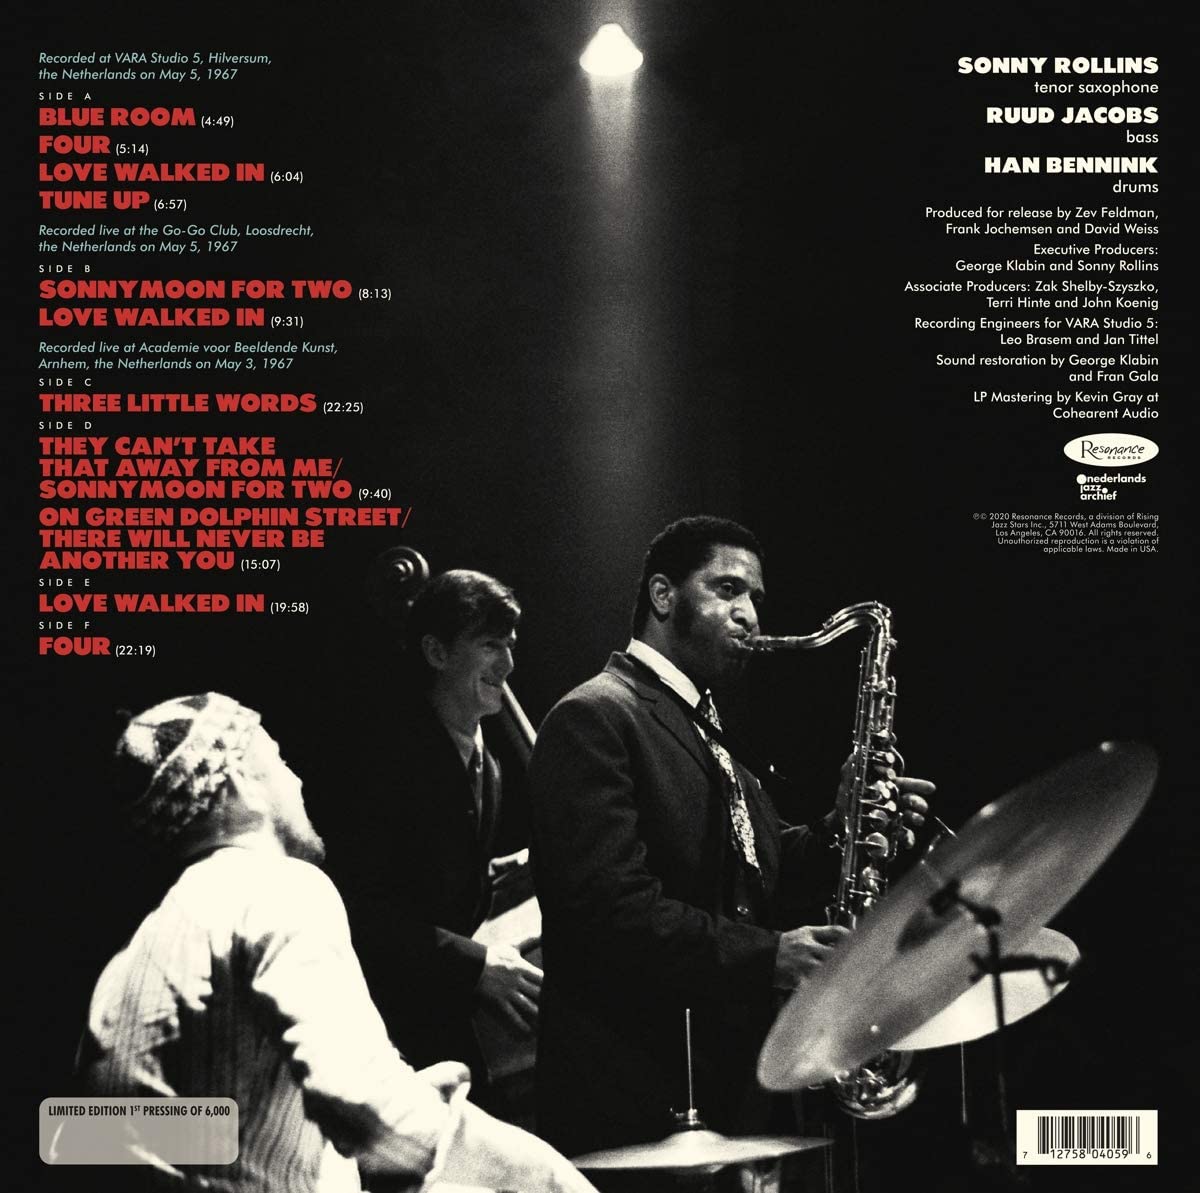 Sonny Rollins - Rollins in Holland: The 1967 Studio & Live Recordings - 2CD